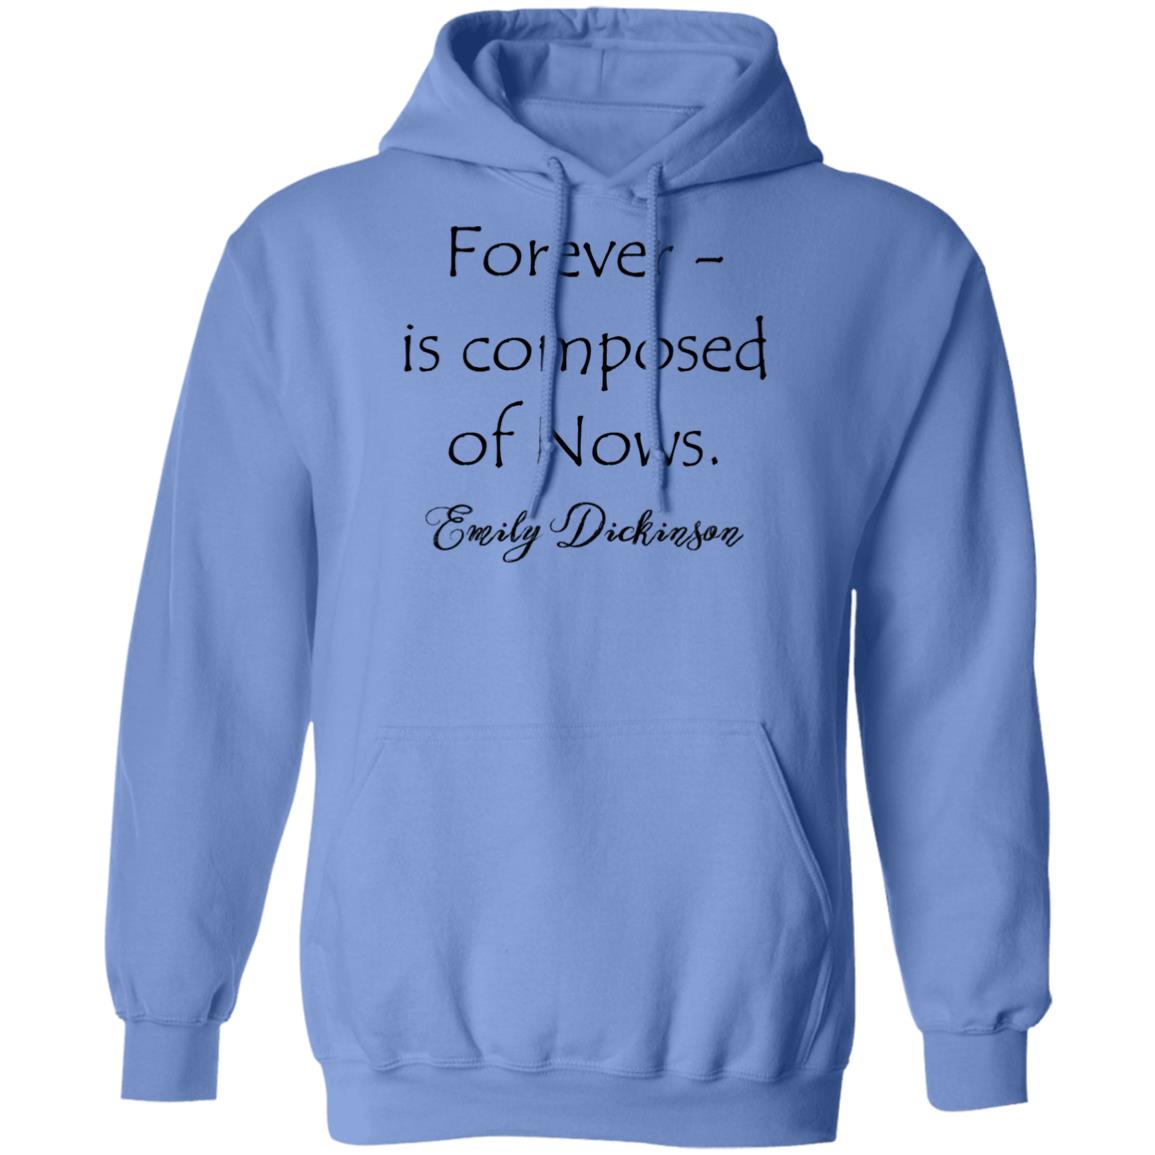 Emily Dickinson Forever - is composed of Nows. Hooded Sweatshirt